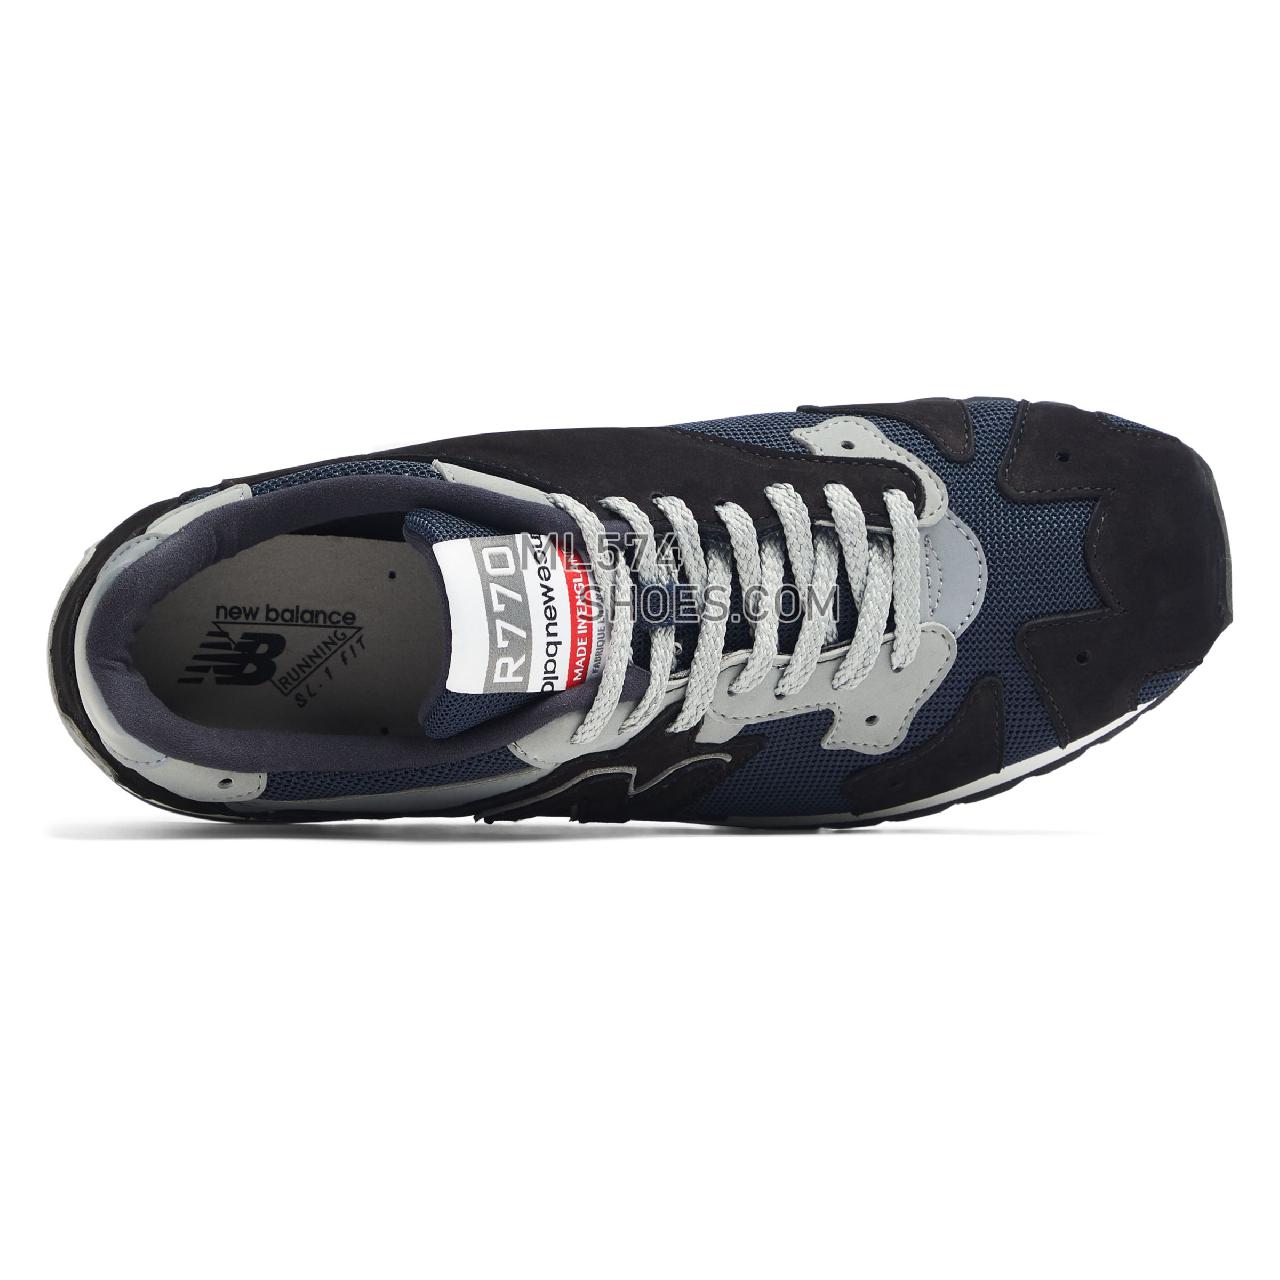 New Balance MADE in UK R770 - Unisex Men's Women's Made in USA And UK Sneakers - Navy with Grey and White - R770NNG